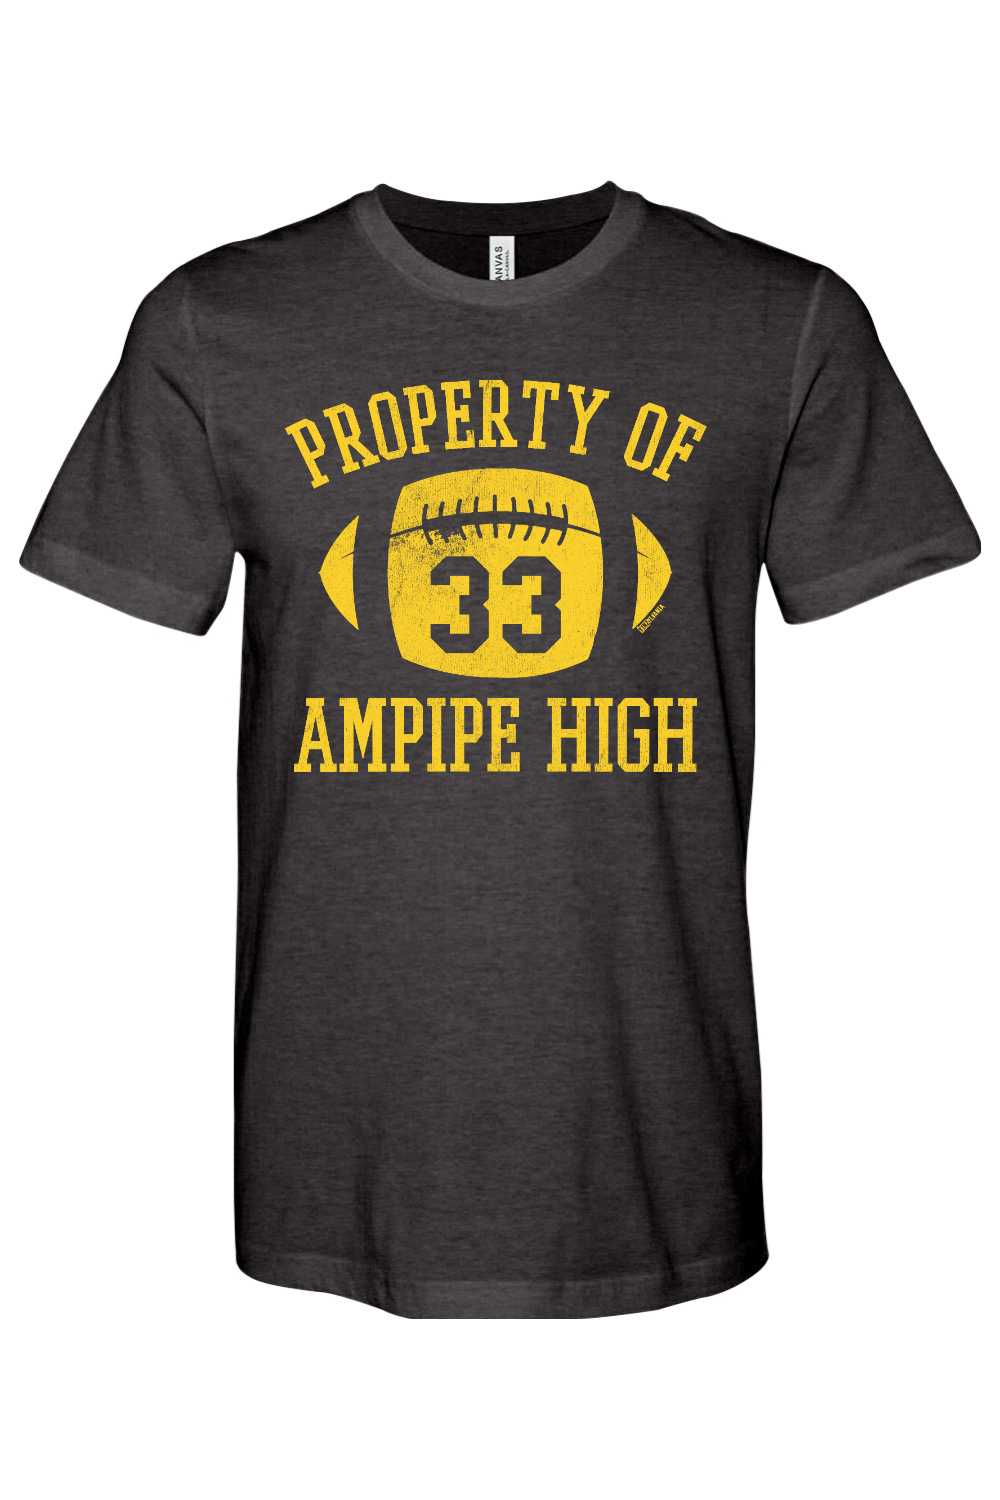 Property of Ampipe High (All the Right Moves) - Yinzylvania